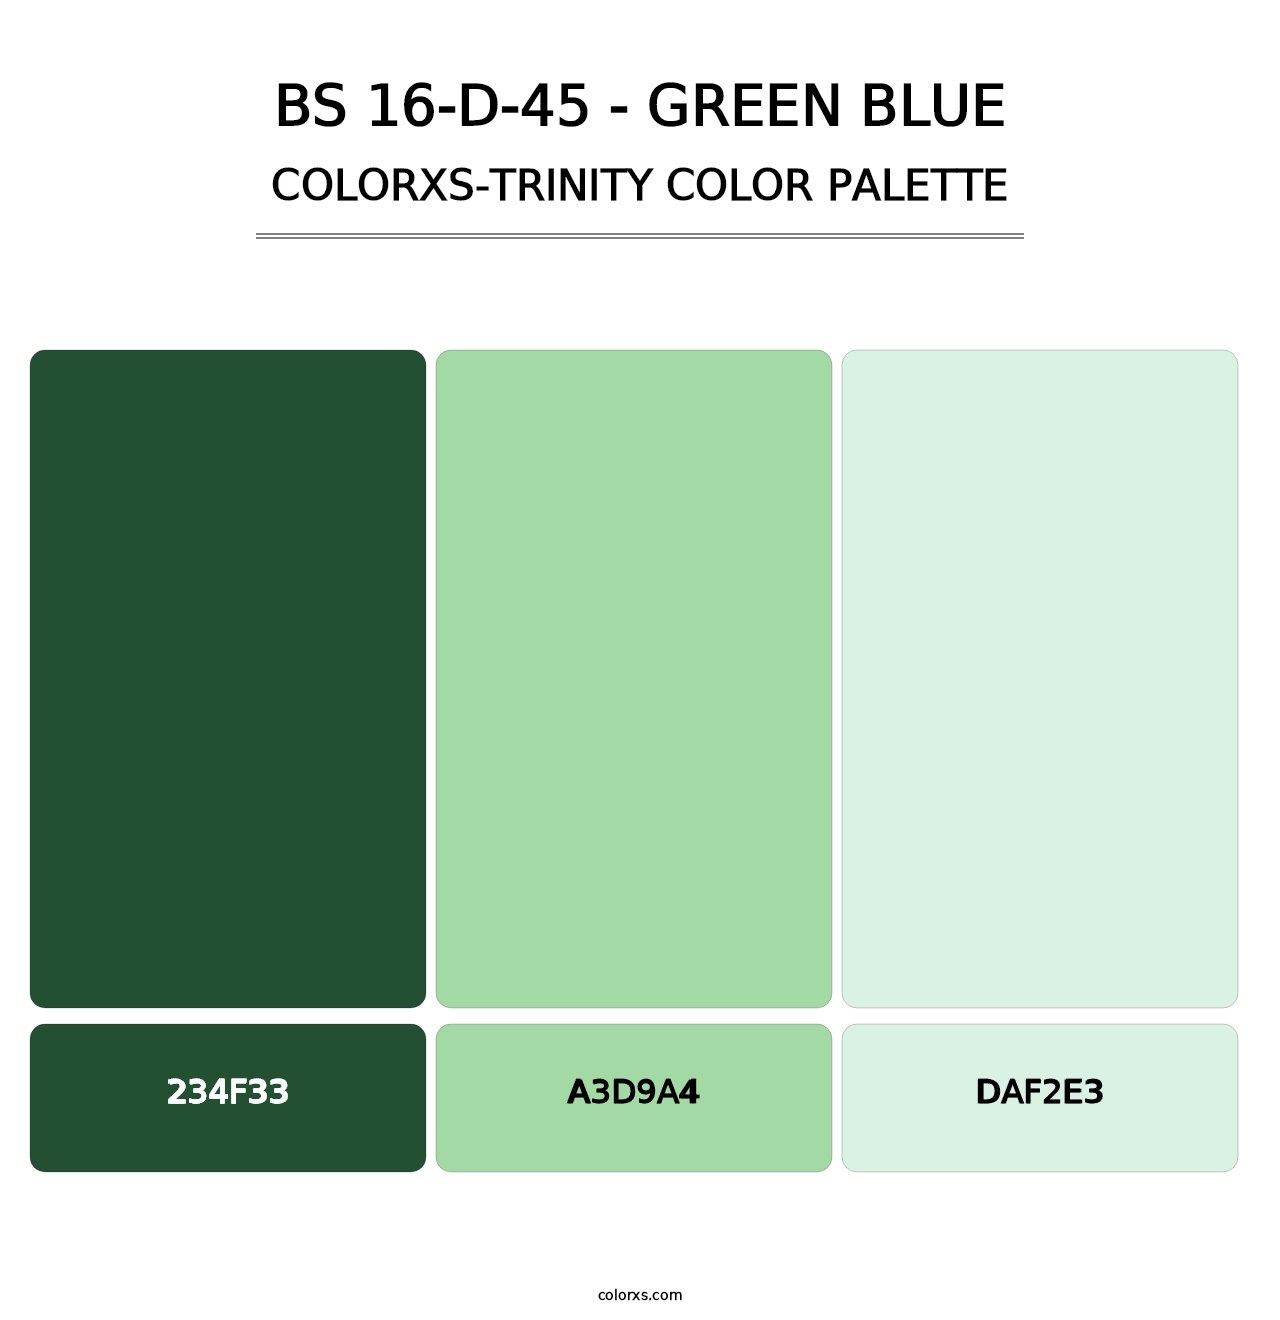 BS 16-D-45 - Green Blue - Colorxs Trinity Palette